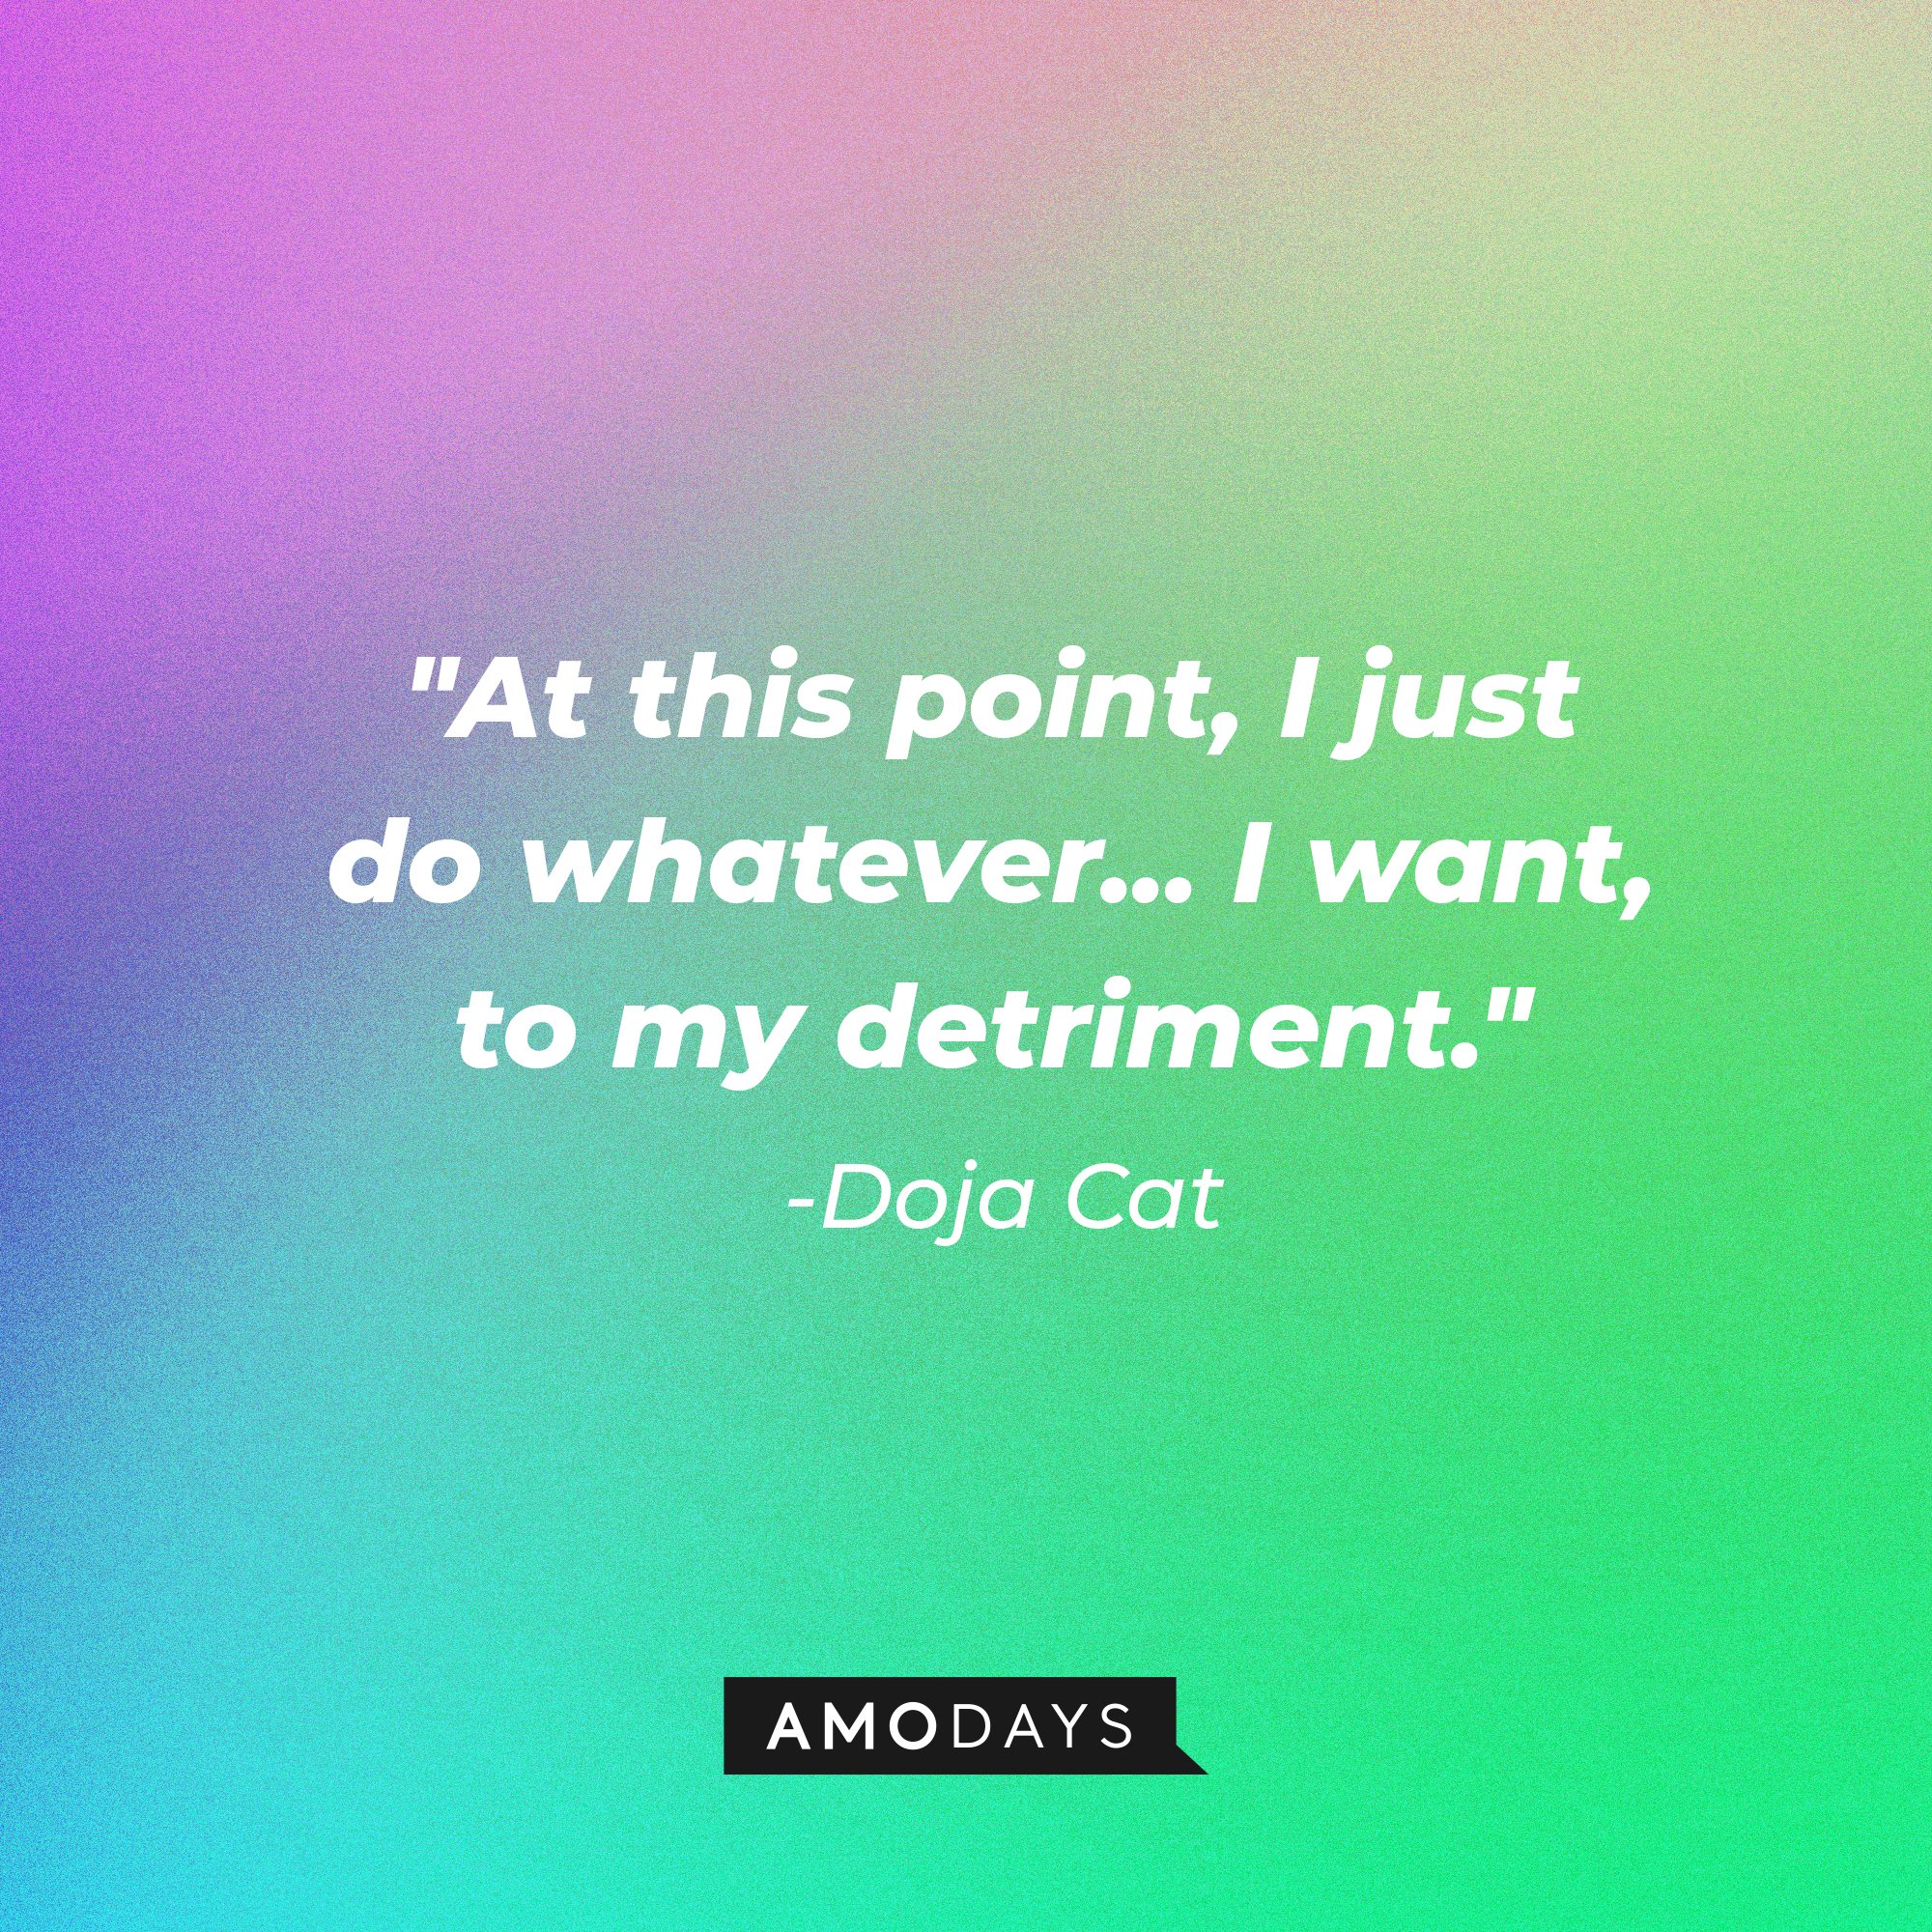 Doja Cat's quote: "At this point, I just do whatever... I want, to my detriment." | Image: AmoDays